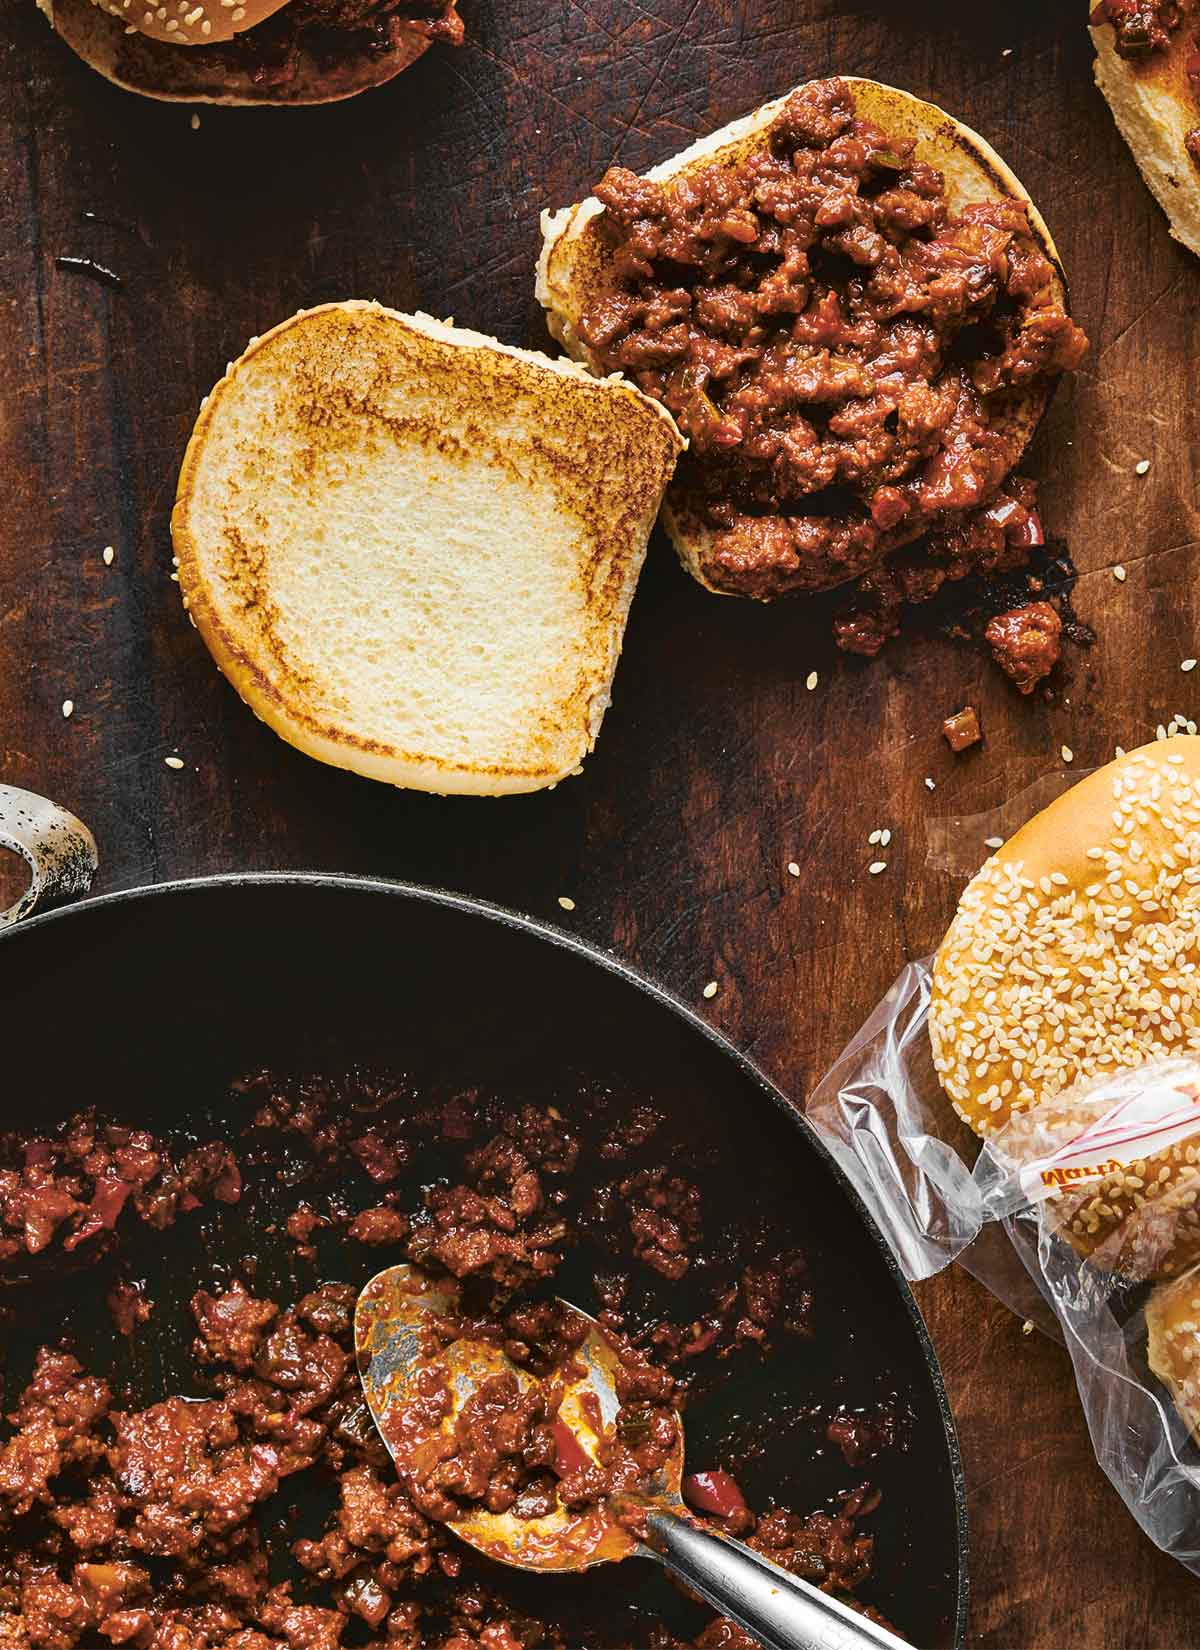 A skillet filled with sloppy Joe meat mixture, flanked by a filled, untapped sandwich with a toasted top and a bag of sesame seed buns.